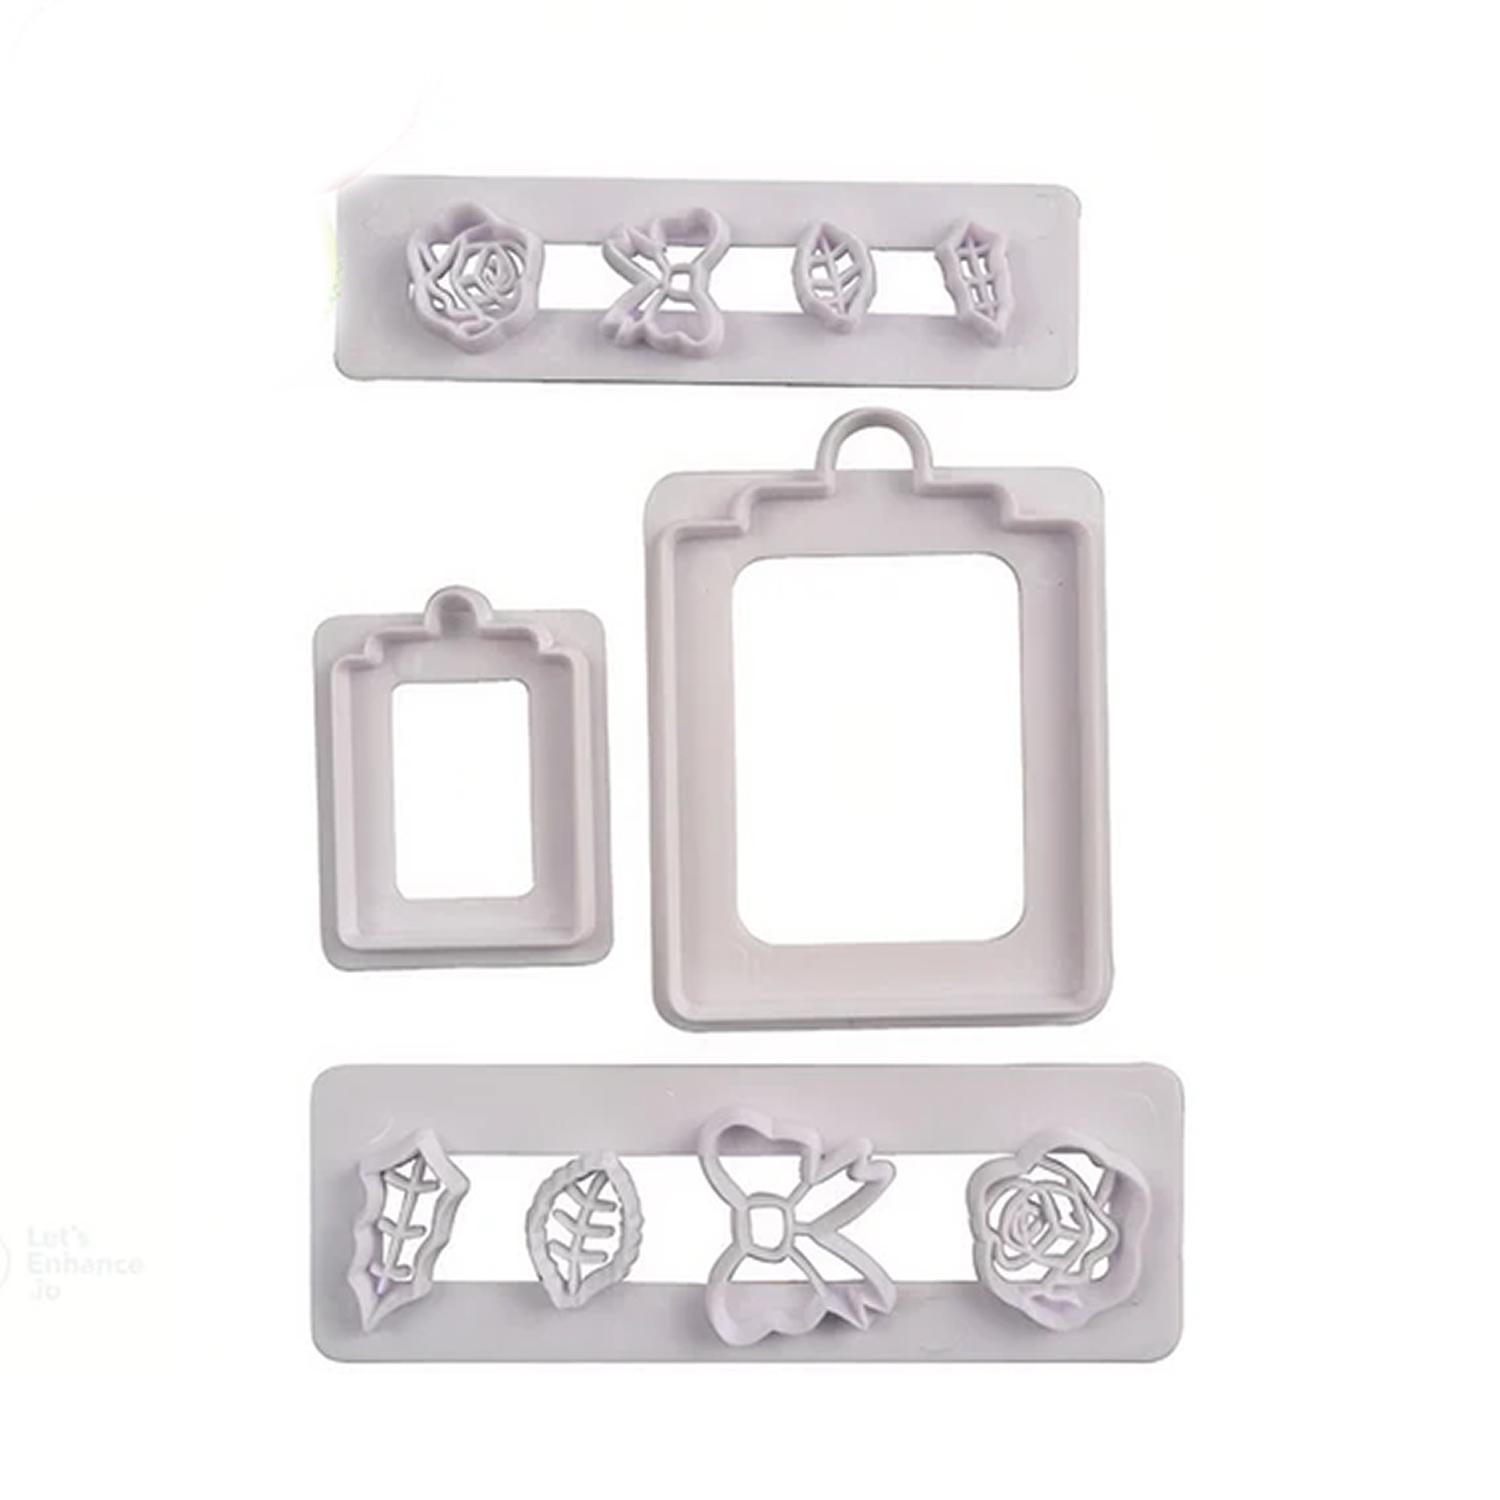 ROSE BOW AND GIFT TAG PLASTIC CUTTER